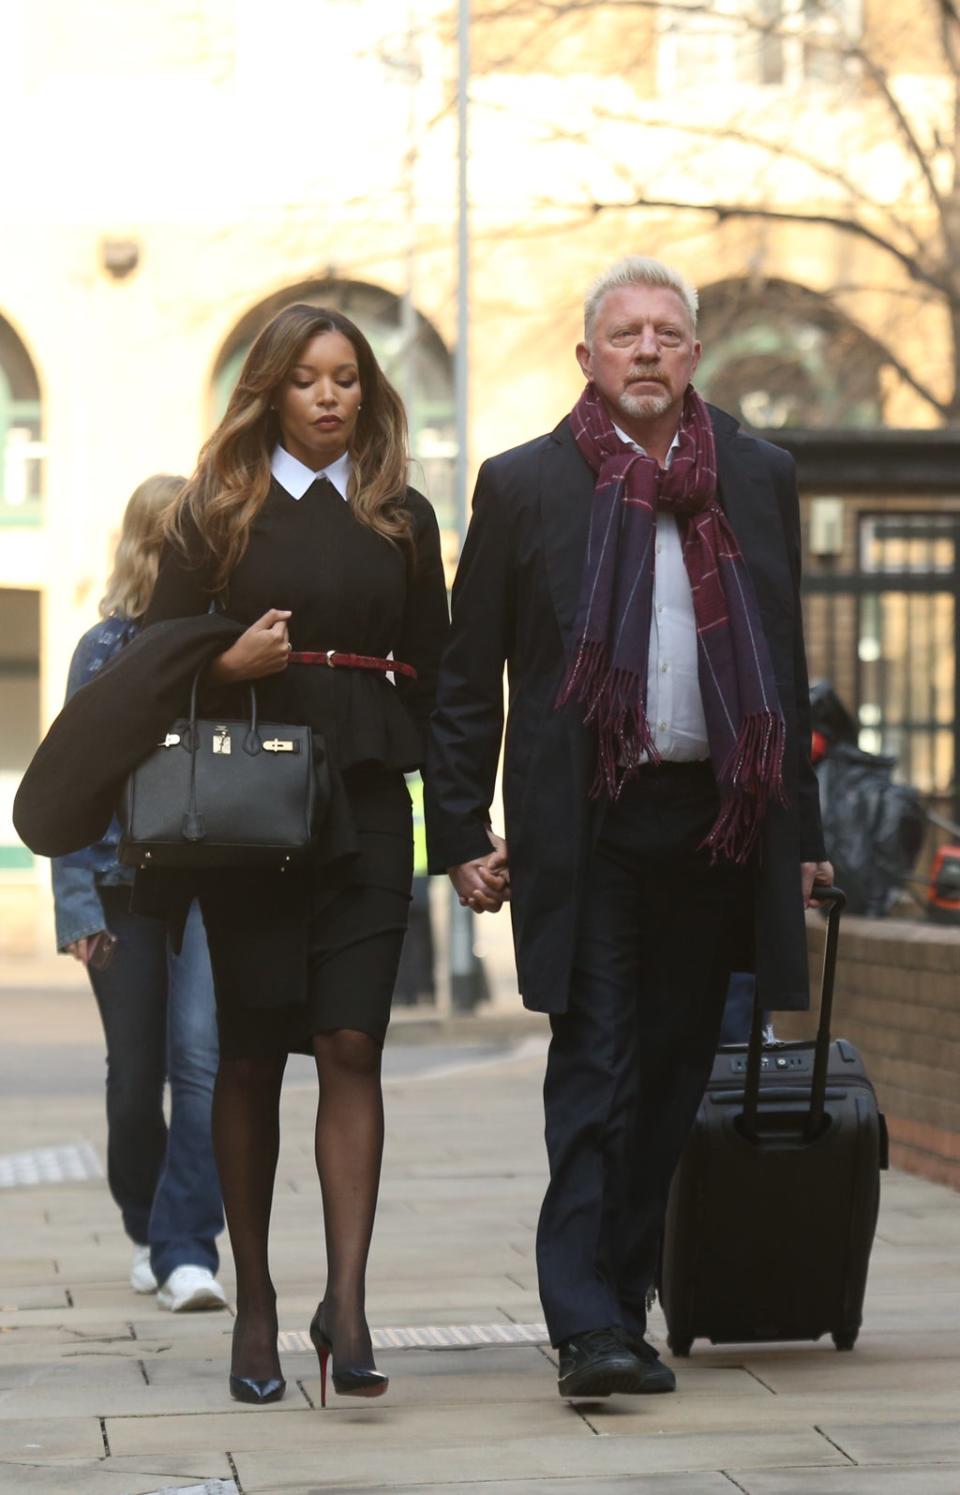 Becker was accompanied by girlfriend Lilian de Carvalho Monteiro on his way to court (PA Wire)